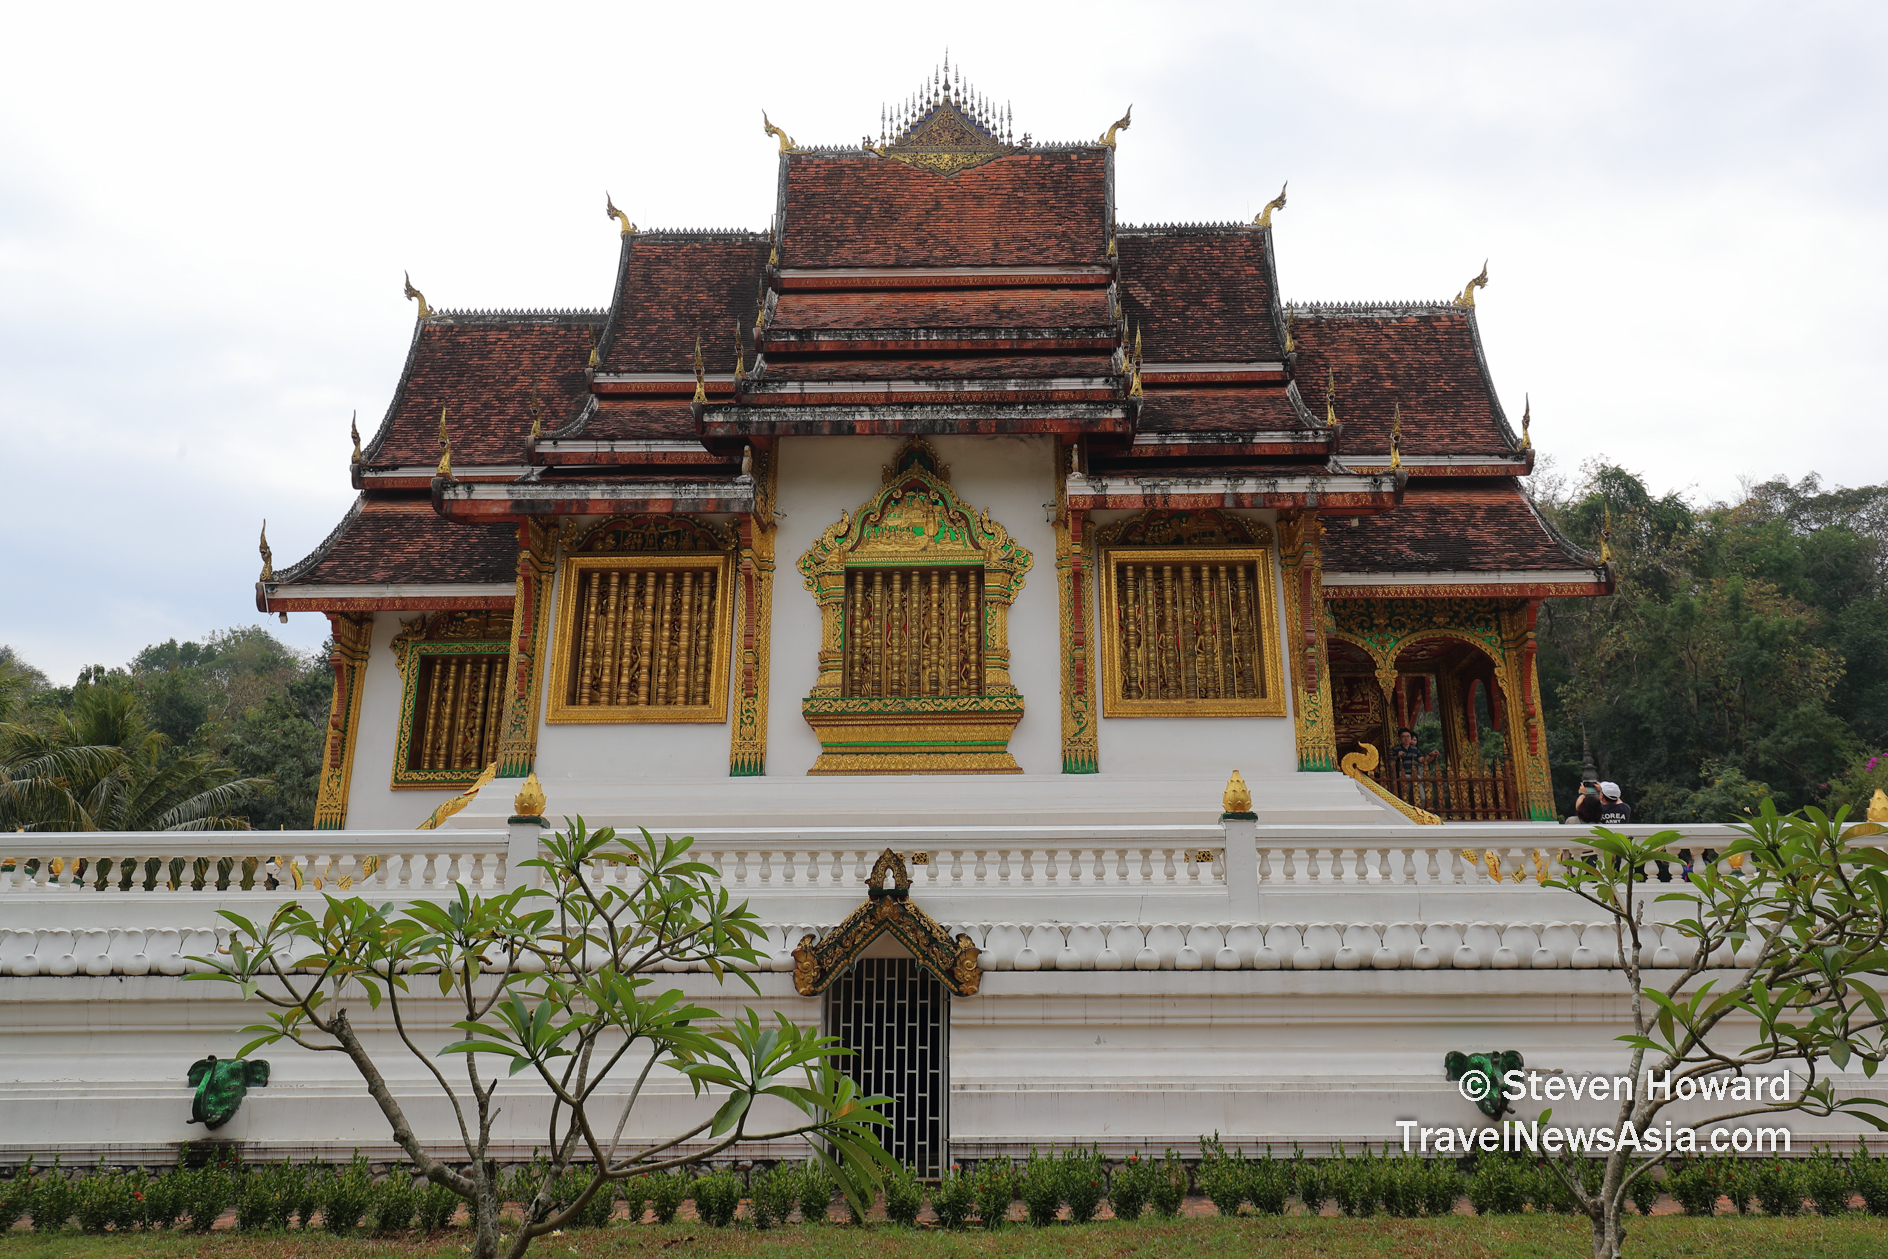 Luang Prabang is a treasure trove of important historical and cultural buildings. Picture by Steven Howard of TravelNewsAsia.com Click to enlarge.